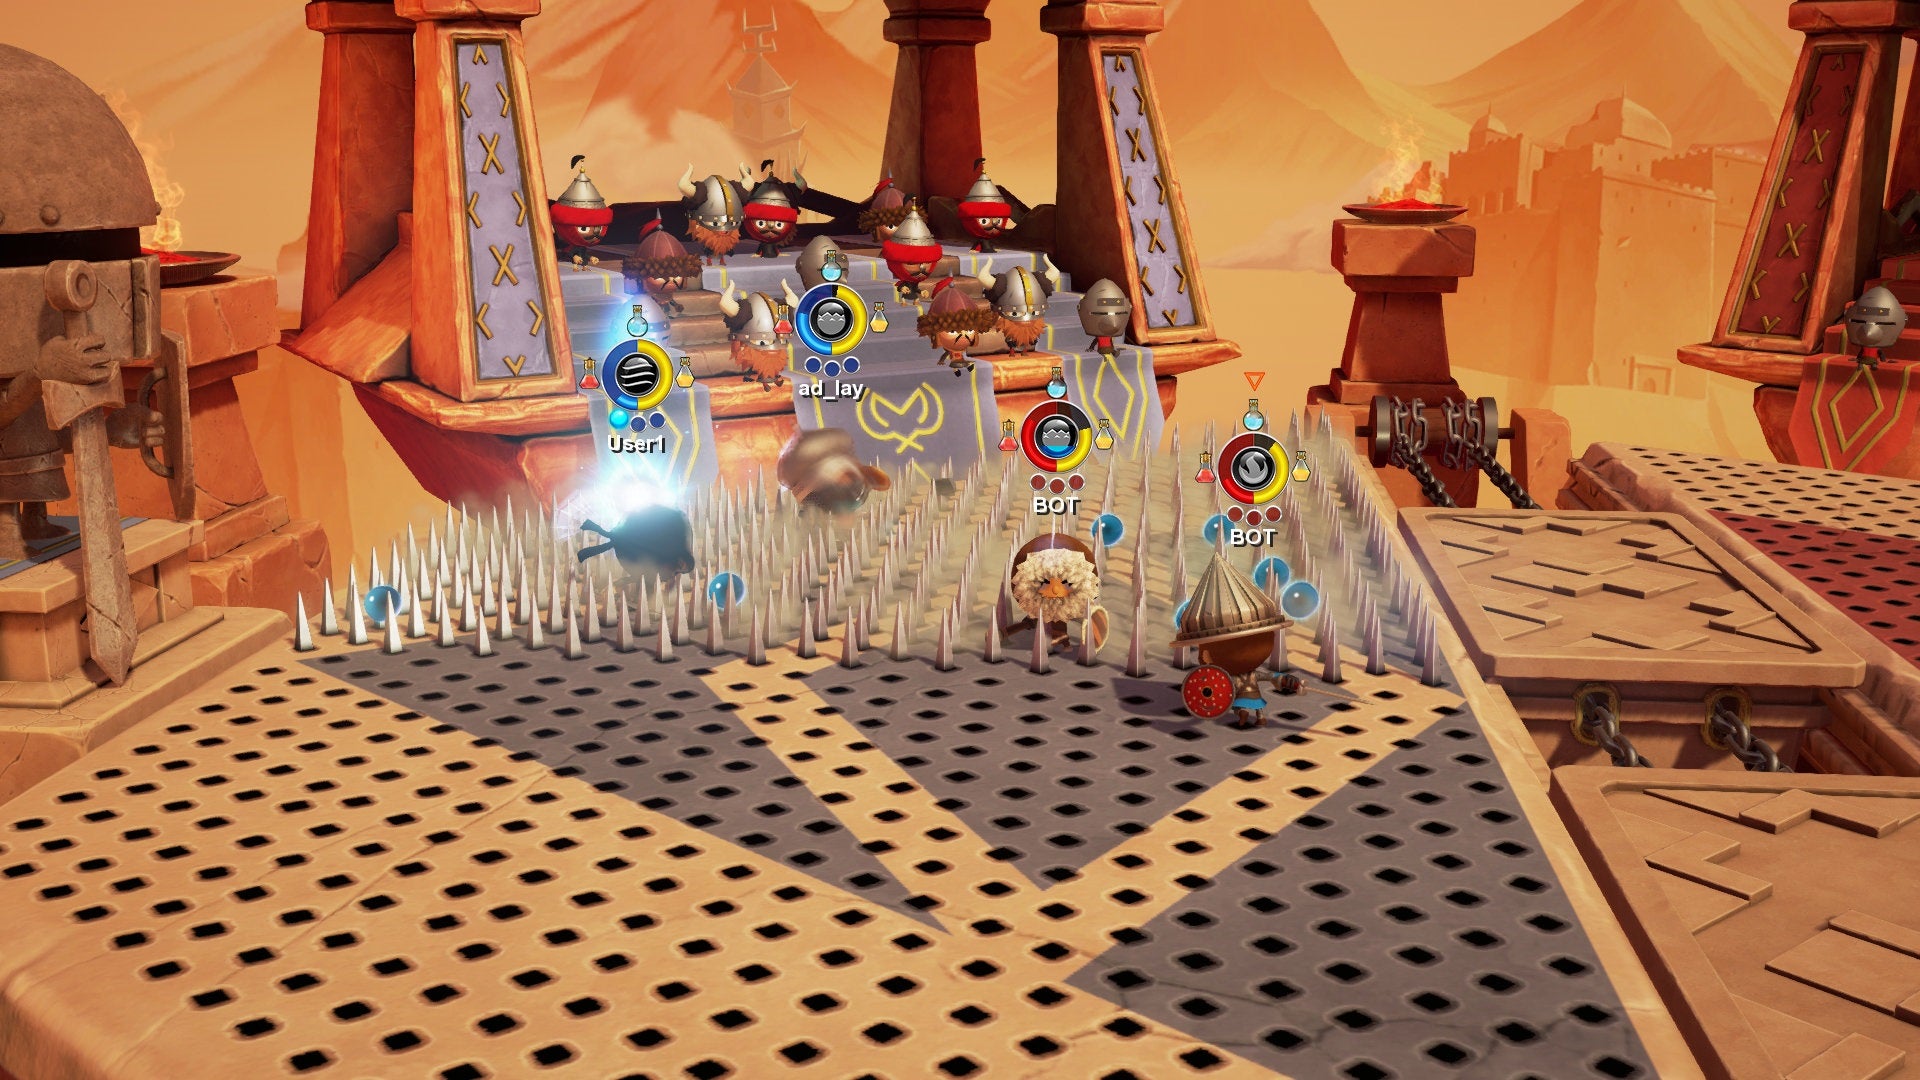 Screenshot of World of Warriors gameplay with characters and obstacles.